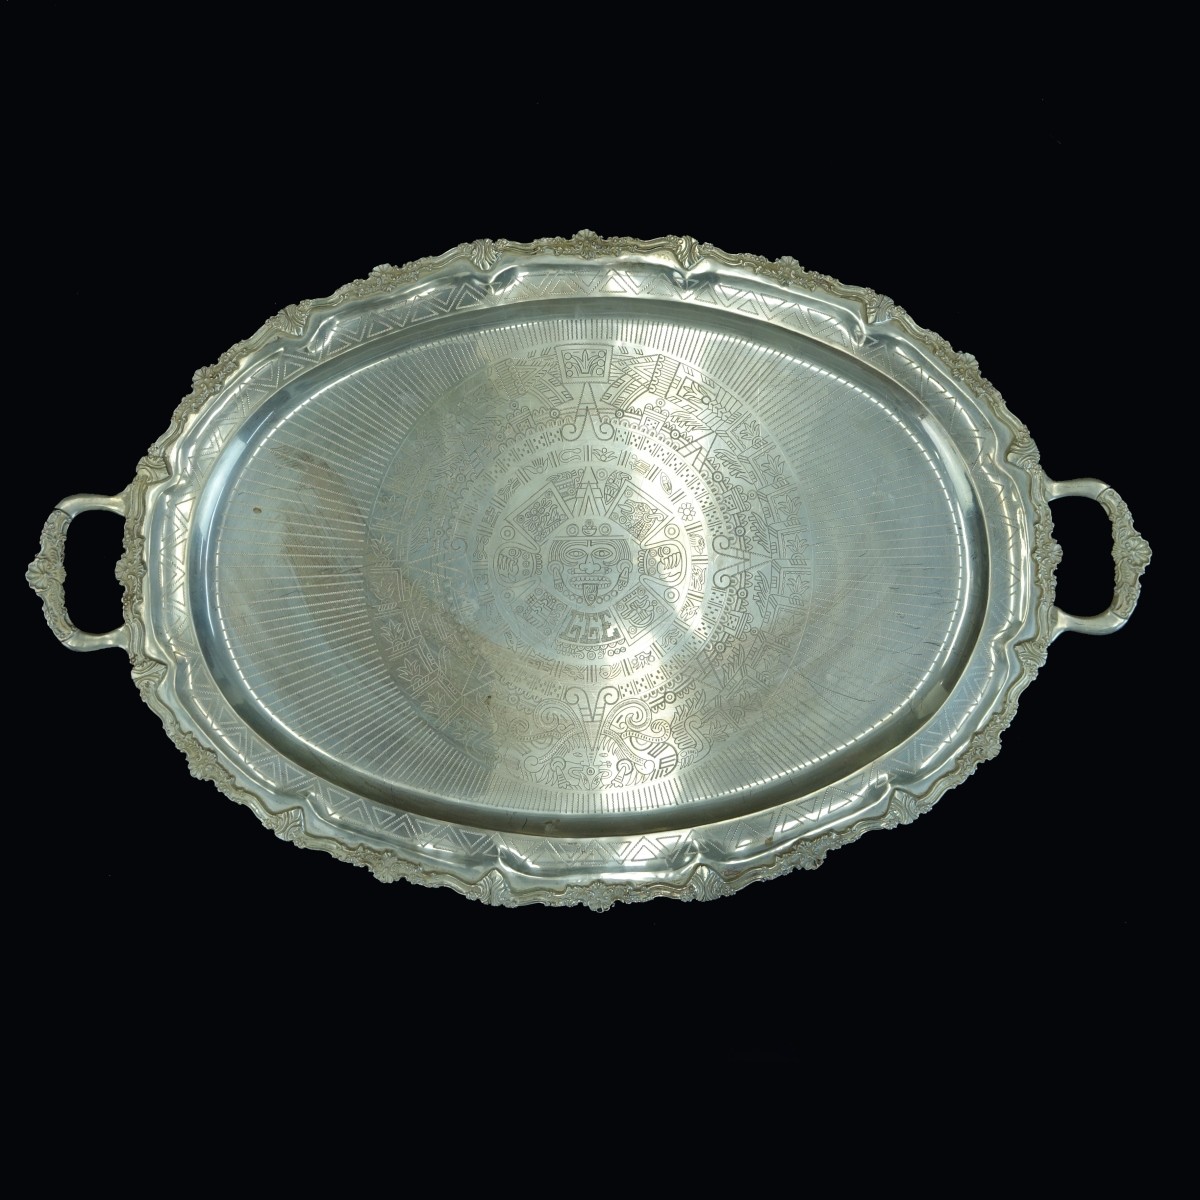 Large Mexican Sterling Silver Tray